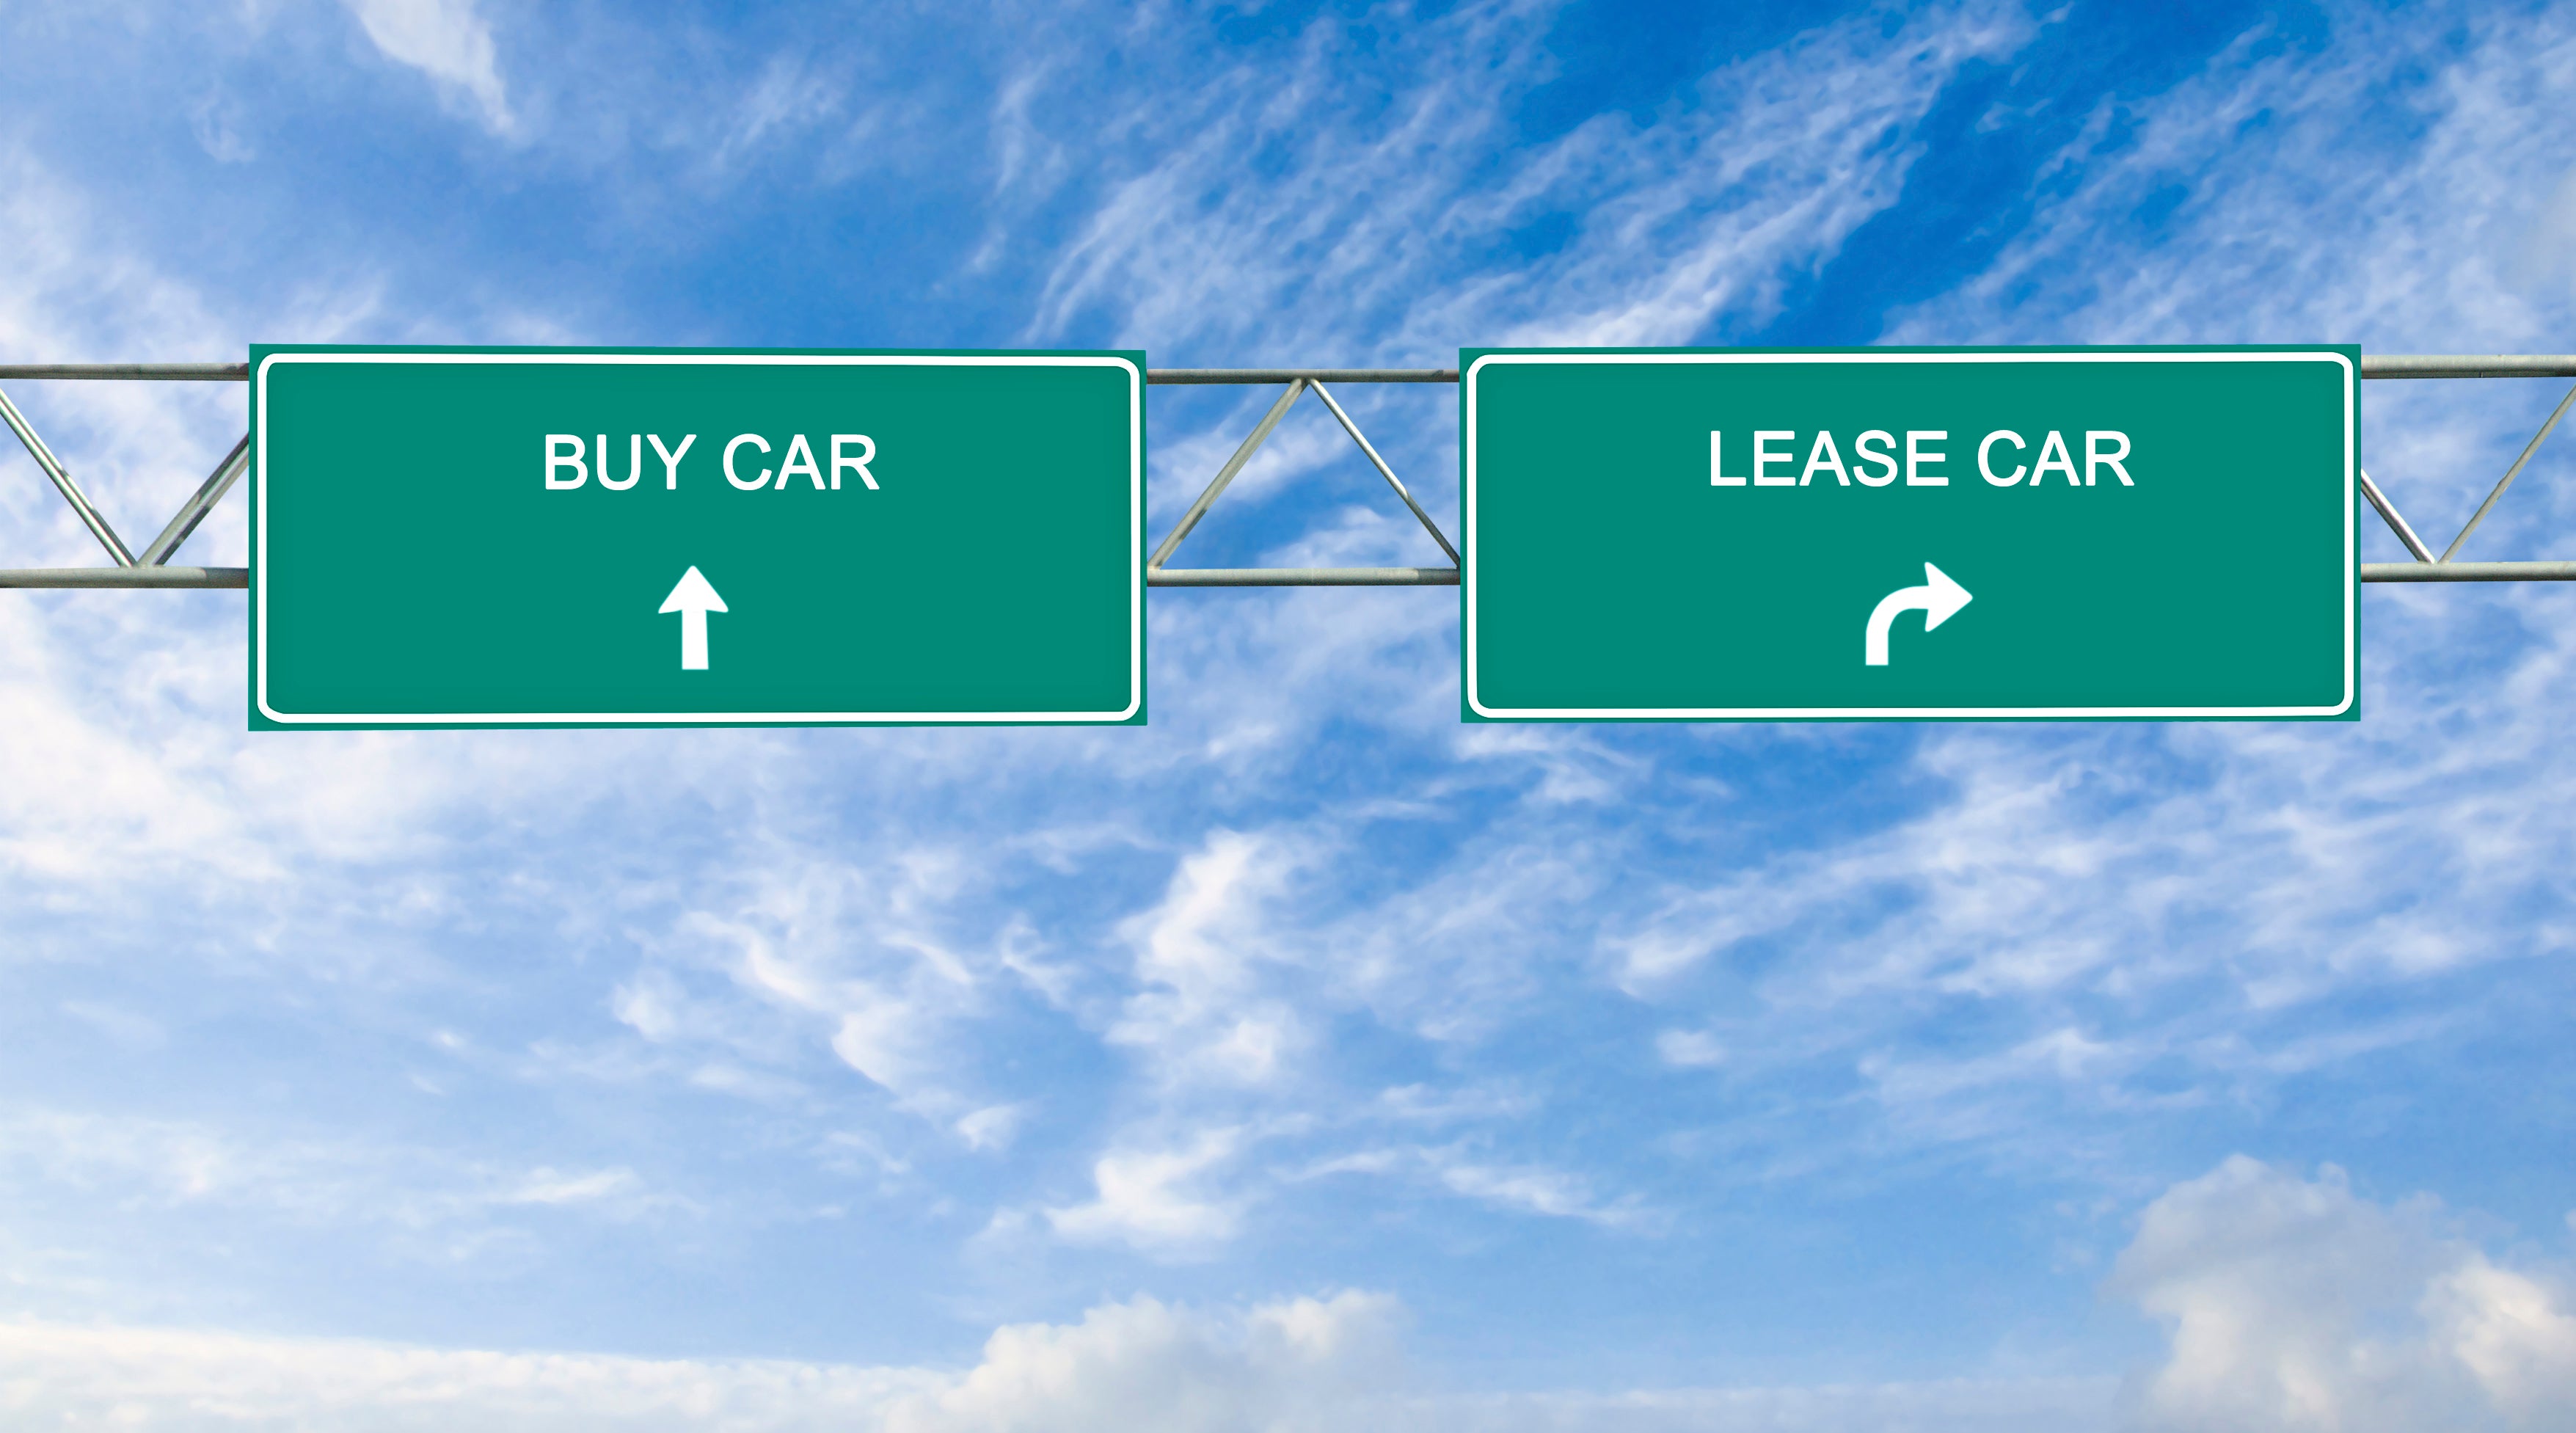 Should I Buy or Lease a Car?